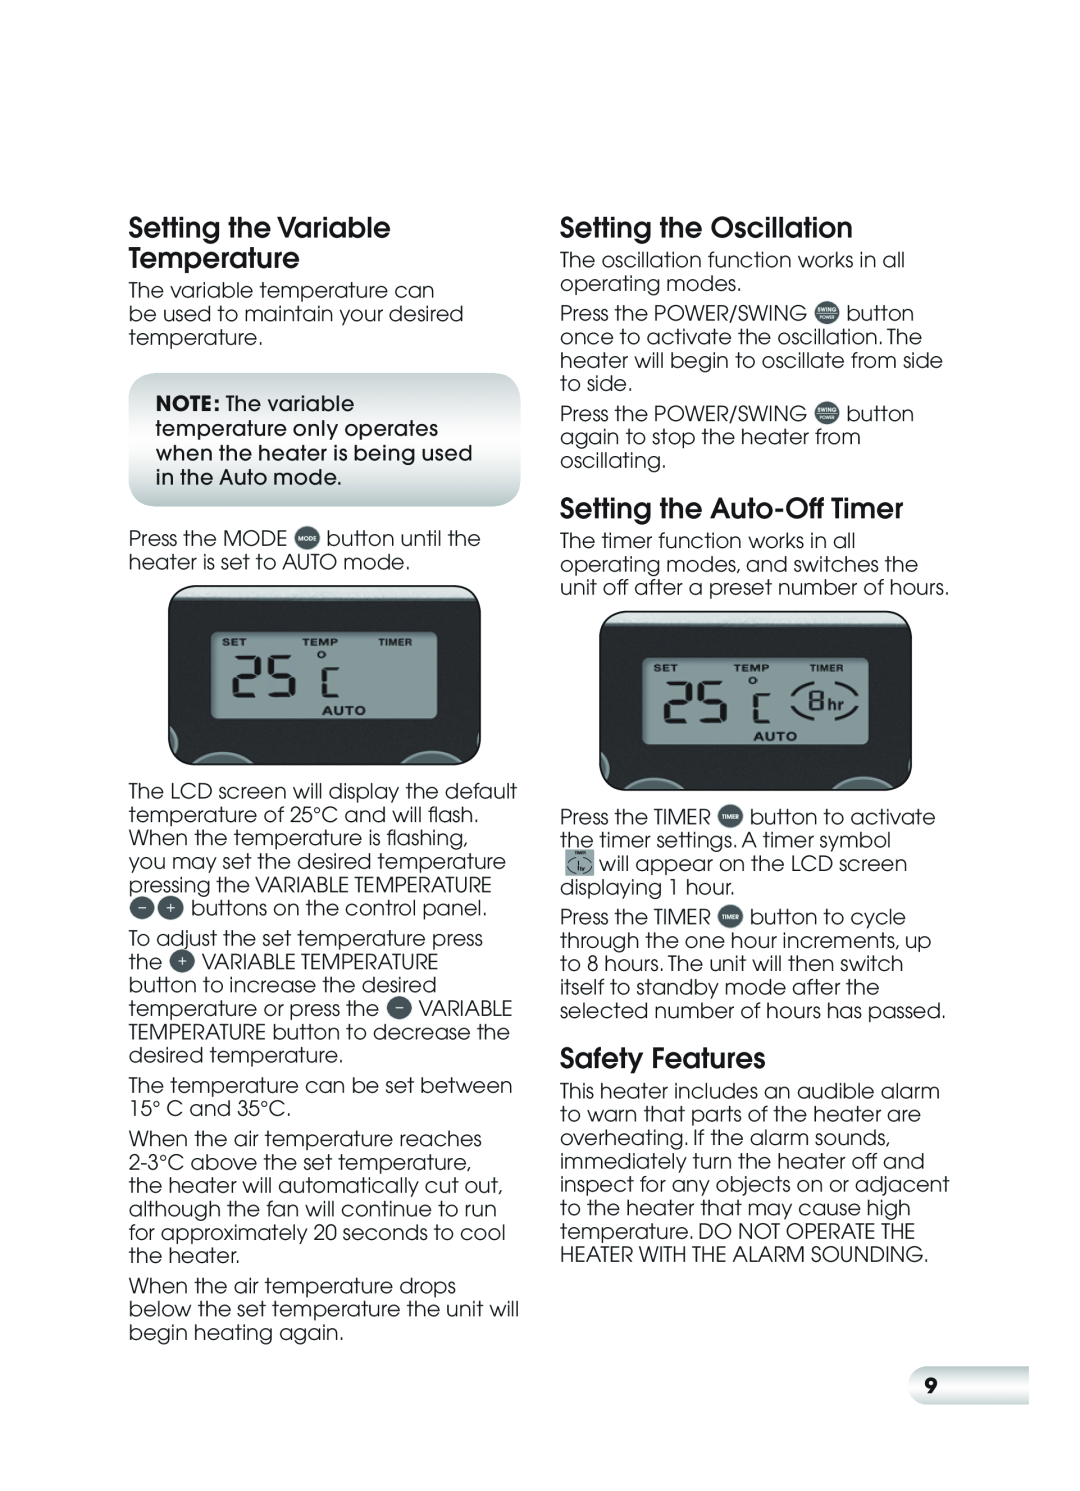 Kambrook KCE520 Setting the Variable Temperature, Setting the Oscillation, Setting the Auto-OffTimer, Safety Features 